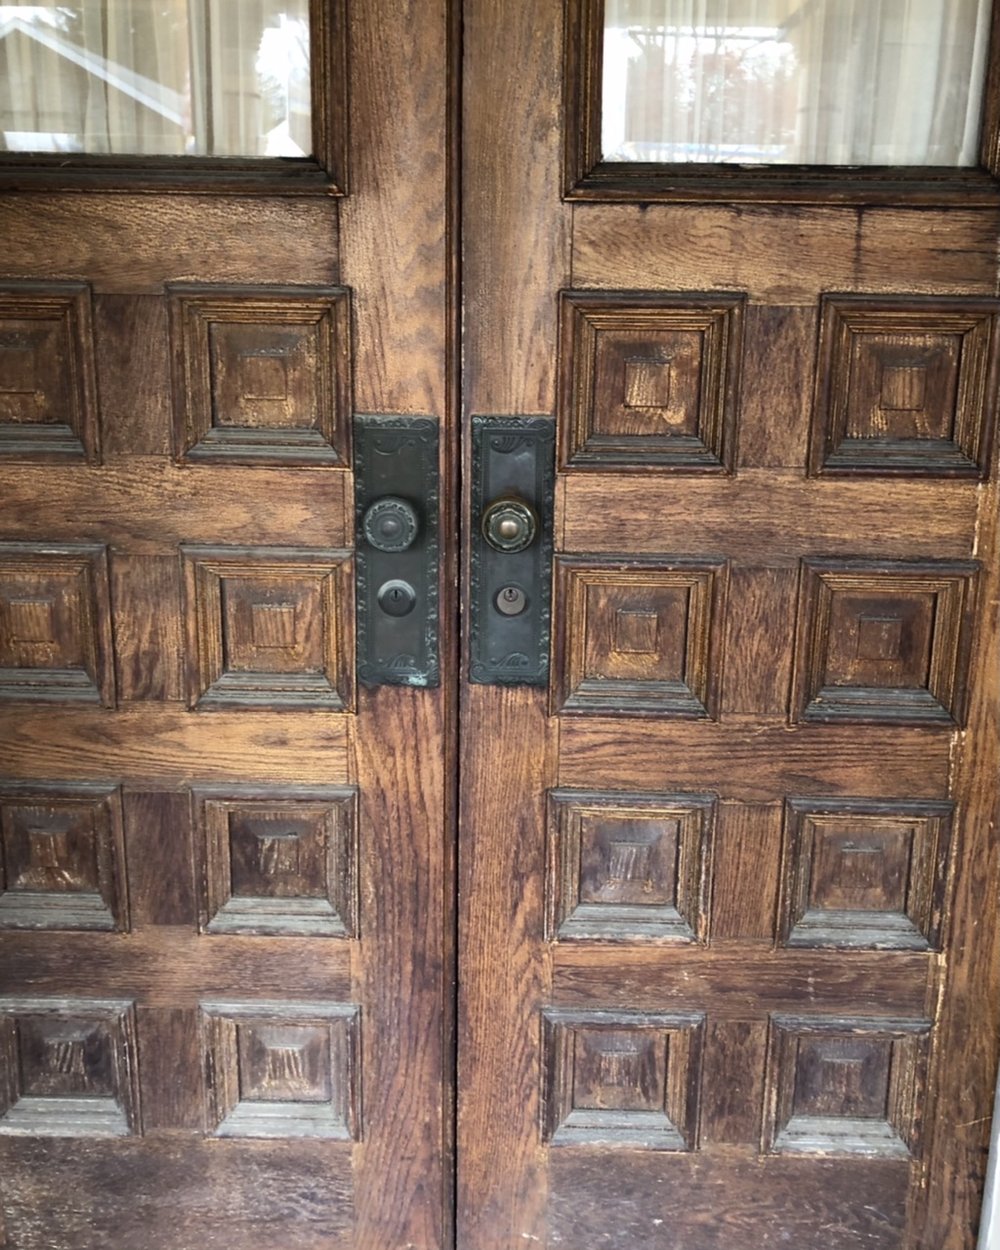 Front doors, while impressive, have been neglected for many, many years. On target for this sprin...